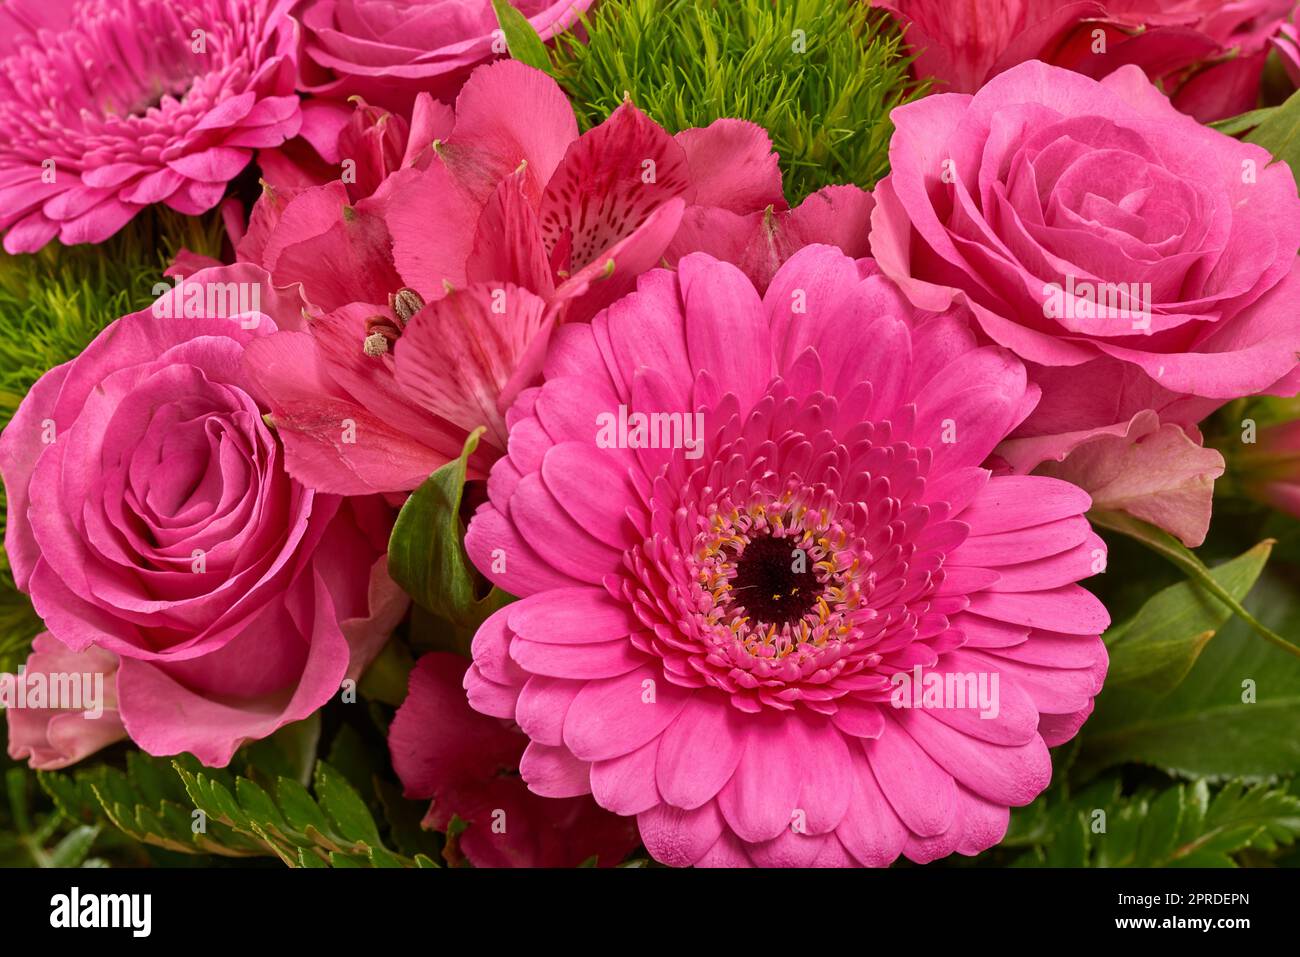 Beautiful bouquet of flowers. Bouquet with different kind of flowers. Stock Photo